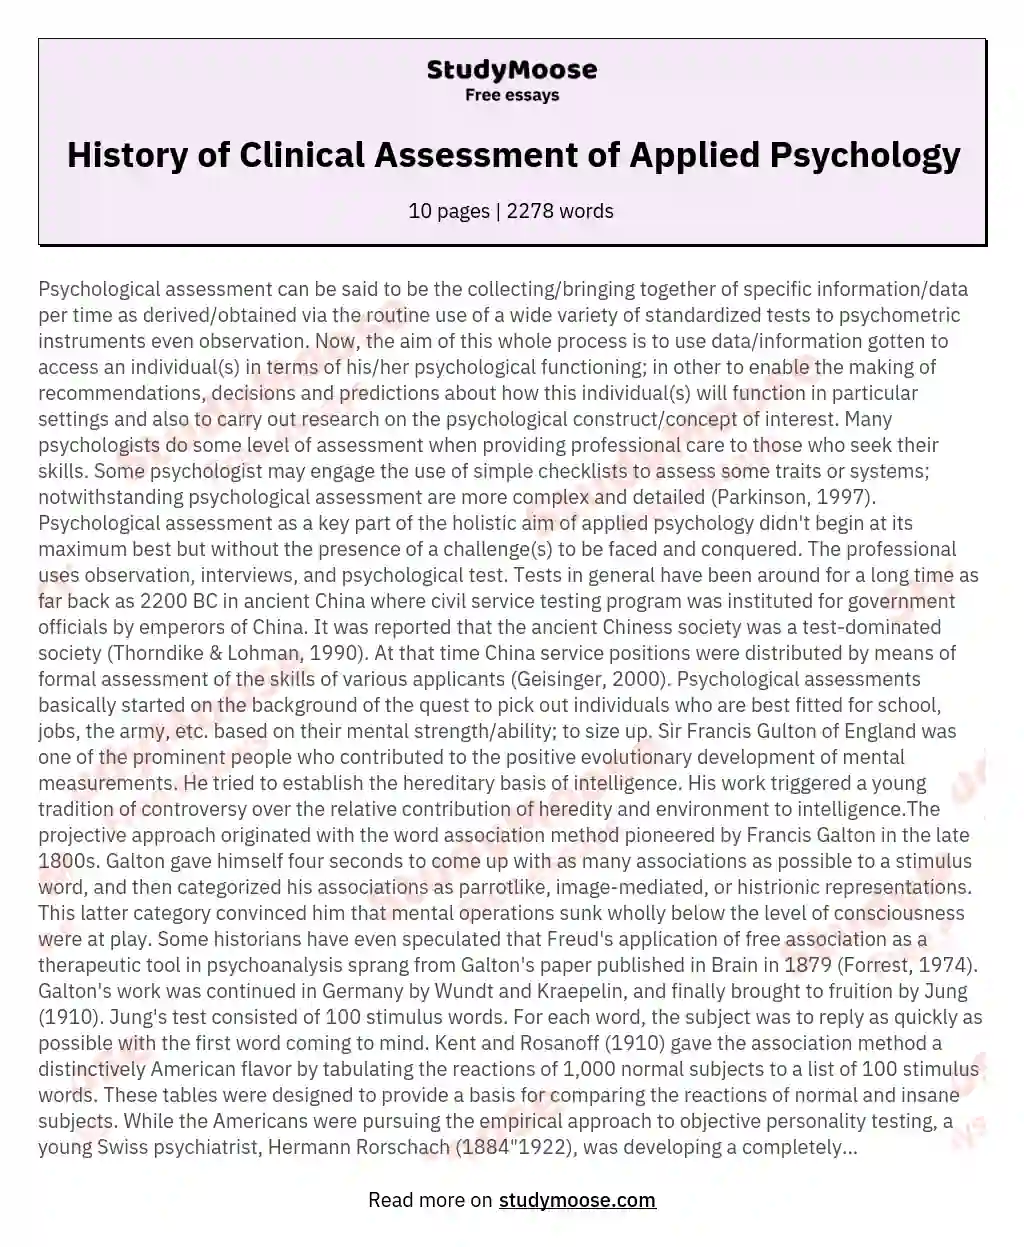 History of Clinical Assessment of Applied Psychology essay